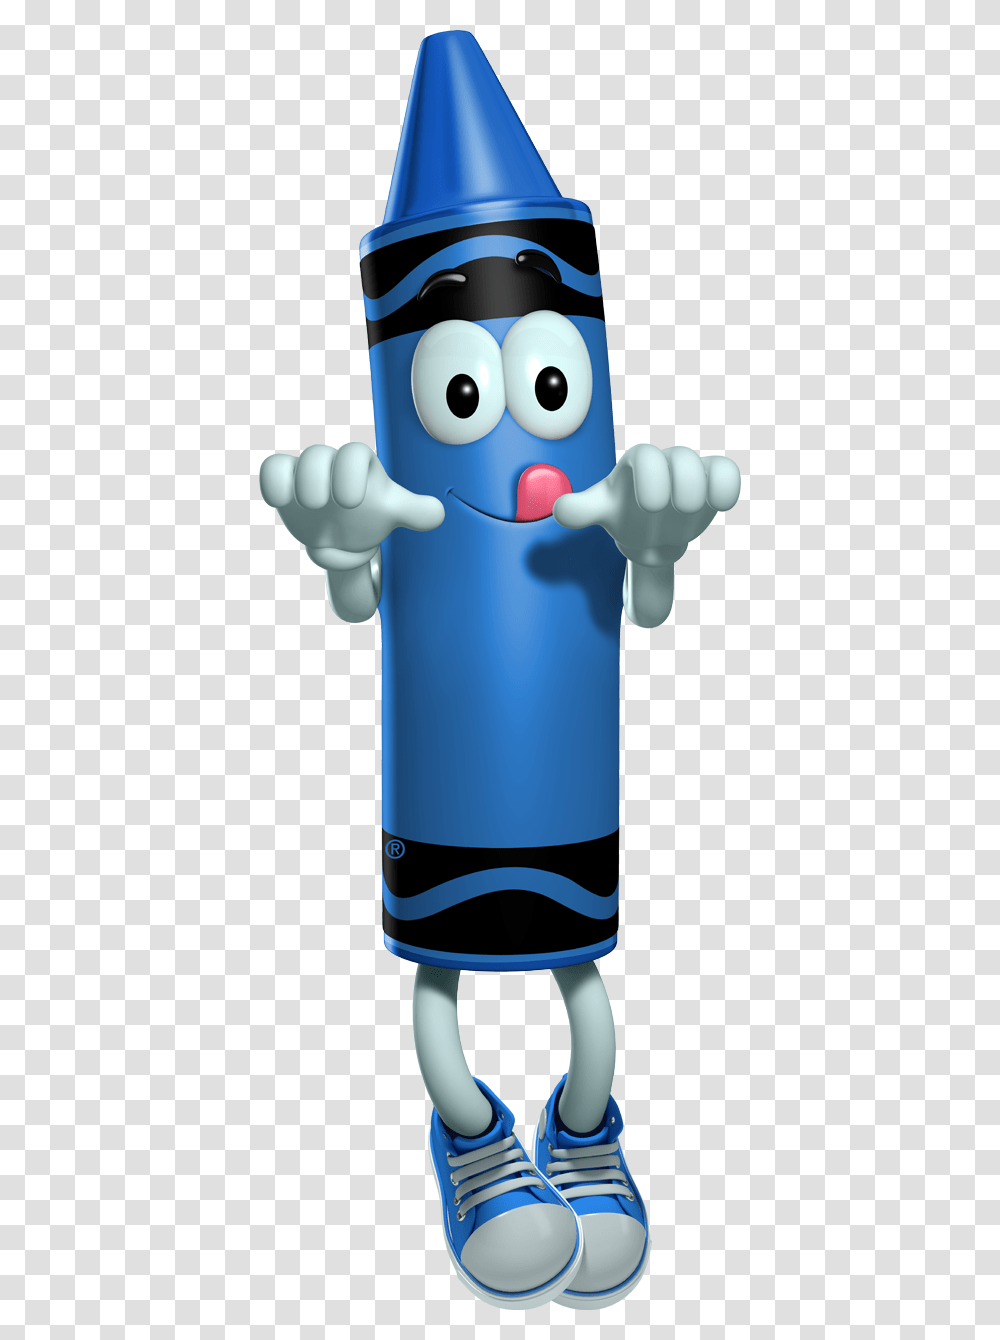 Crayon Hanging In There Crayola Crayons Clipart Blue, Toy, Bottle, Hand Transparent Png